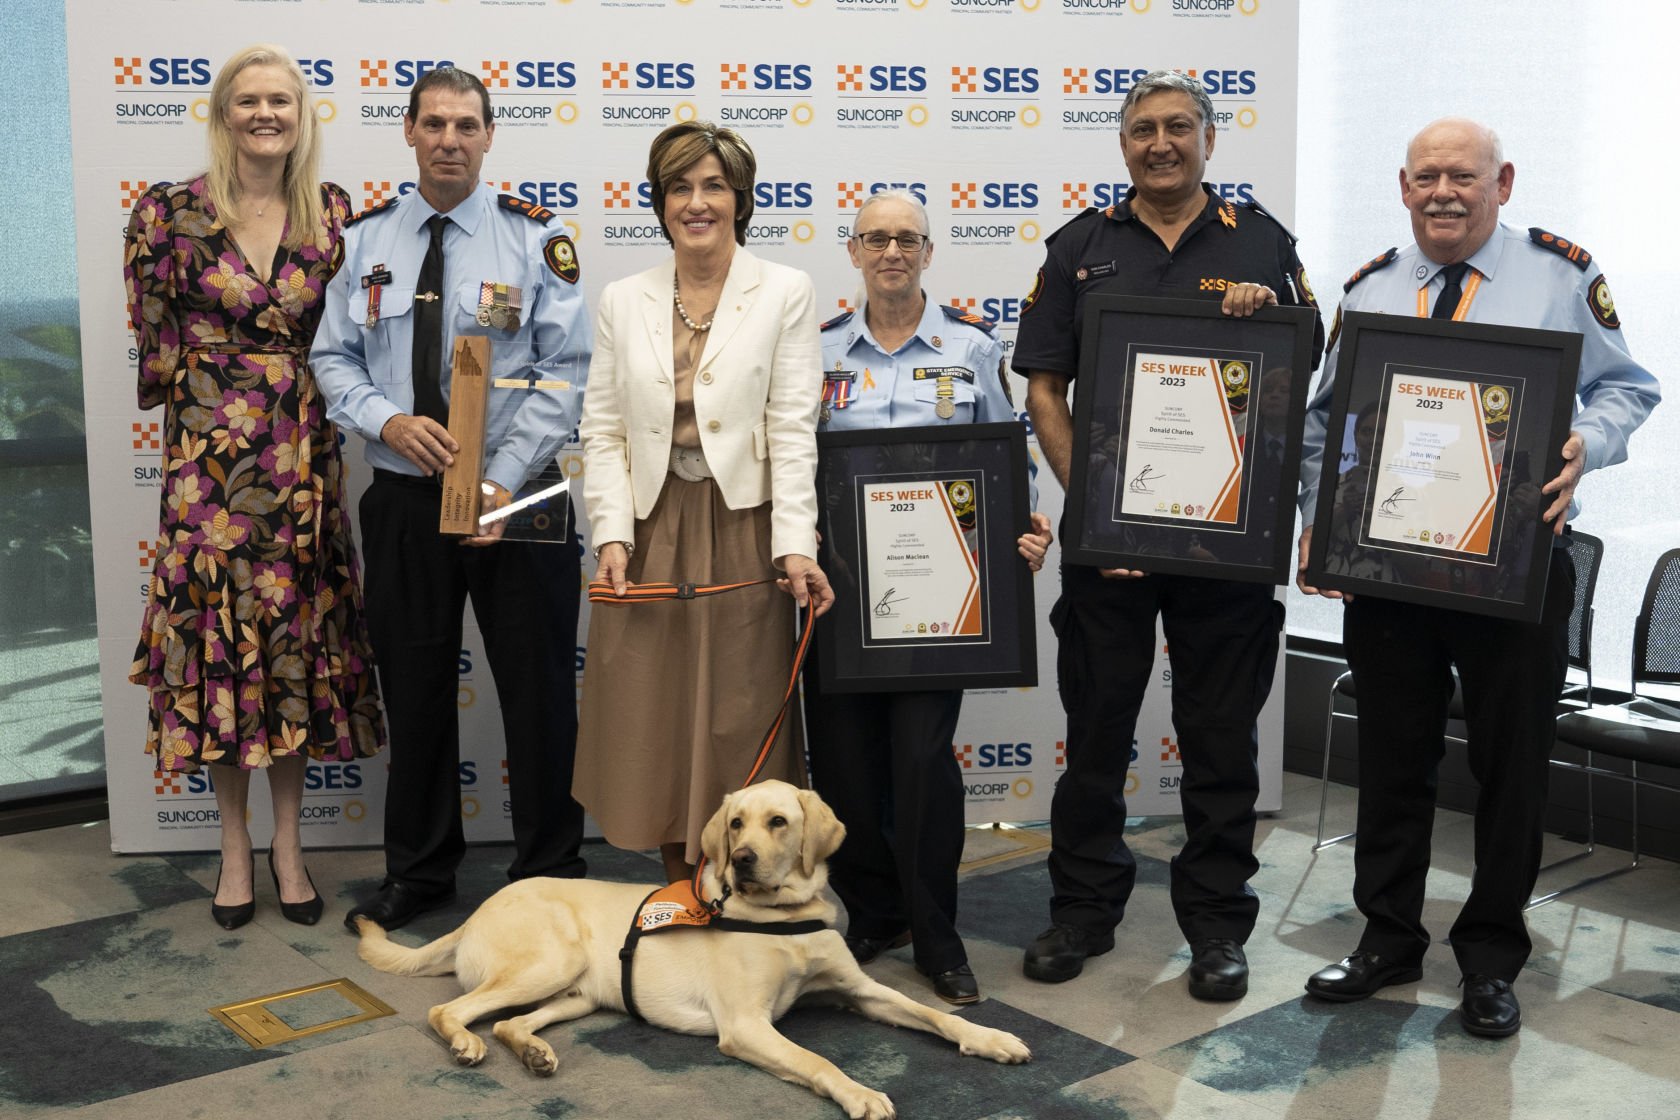 Strength, bravery and spirit on display, as Suncorp Group honours top QLD SES volunteers